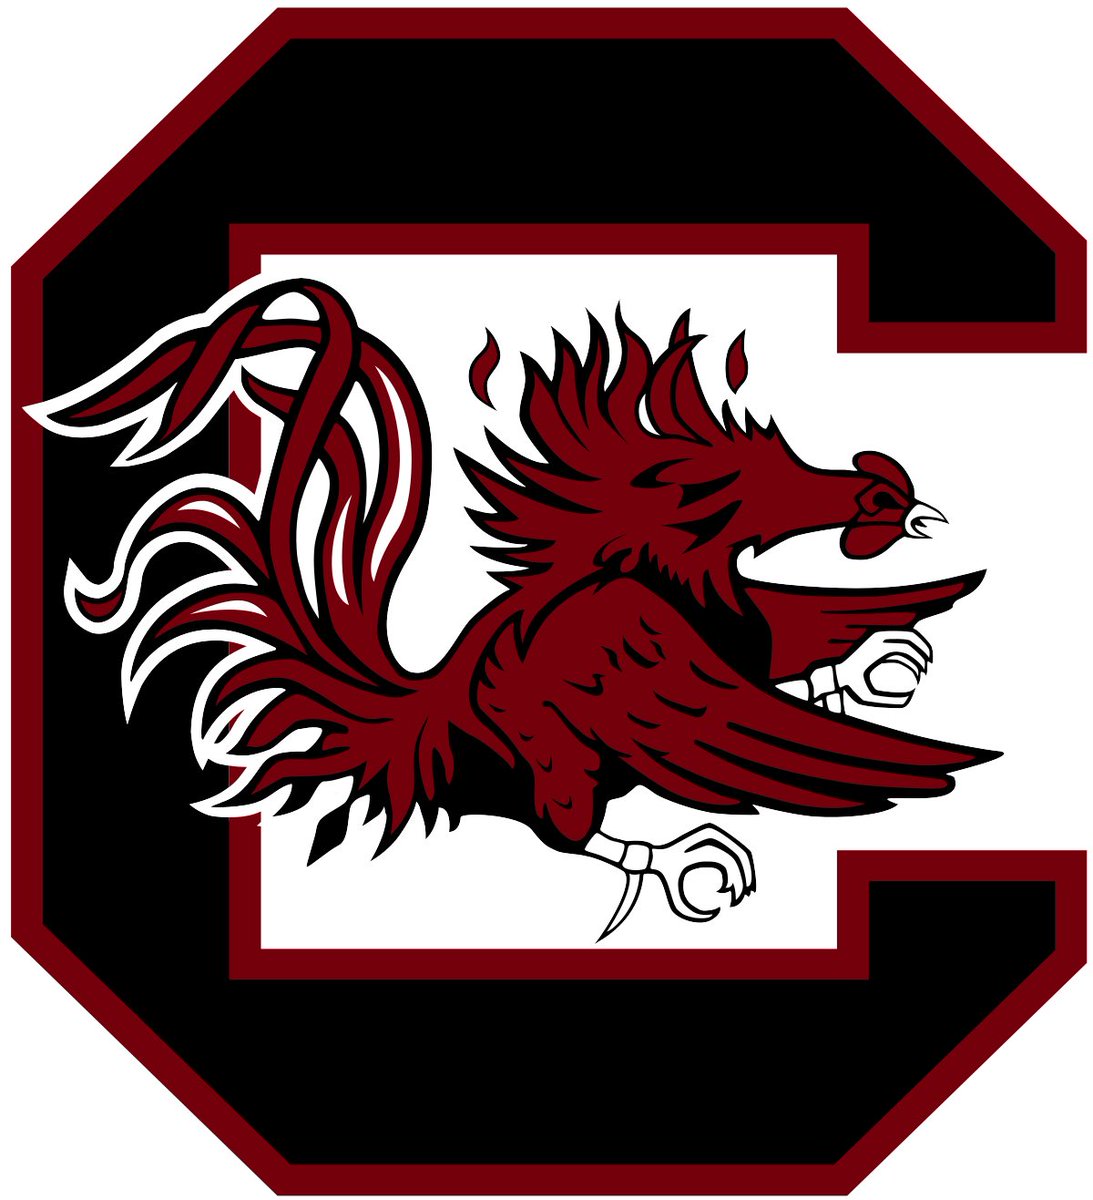 i am blessed to receive an offer from university of south Carolina ⚫️🔴!!! @GamecockFB @CoachBlack10 @GCockRecruiting @OHSPatsFootball @CoachCreasy_OHS @SeanW_Rivals